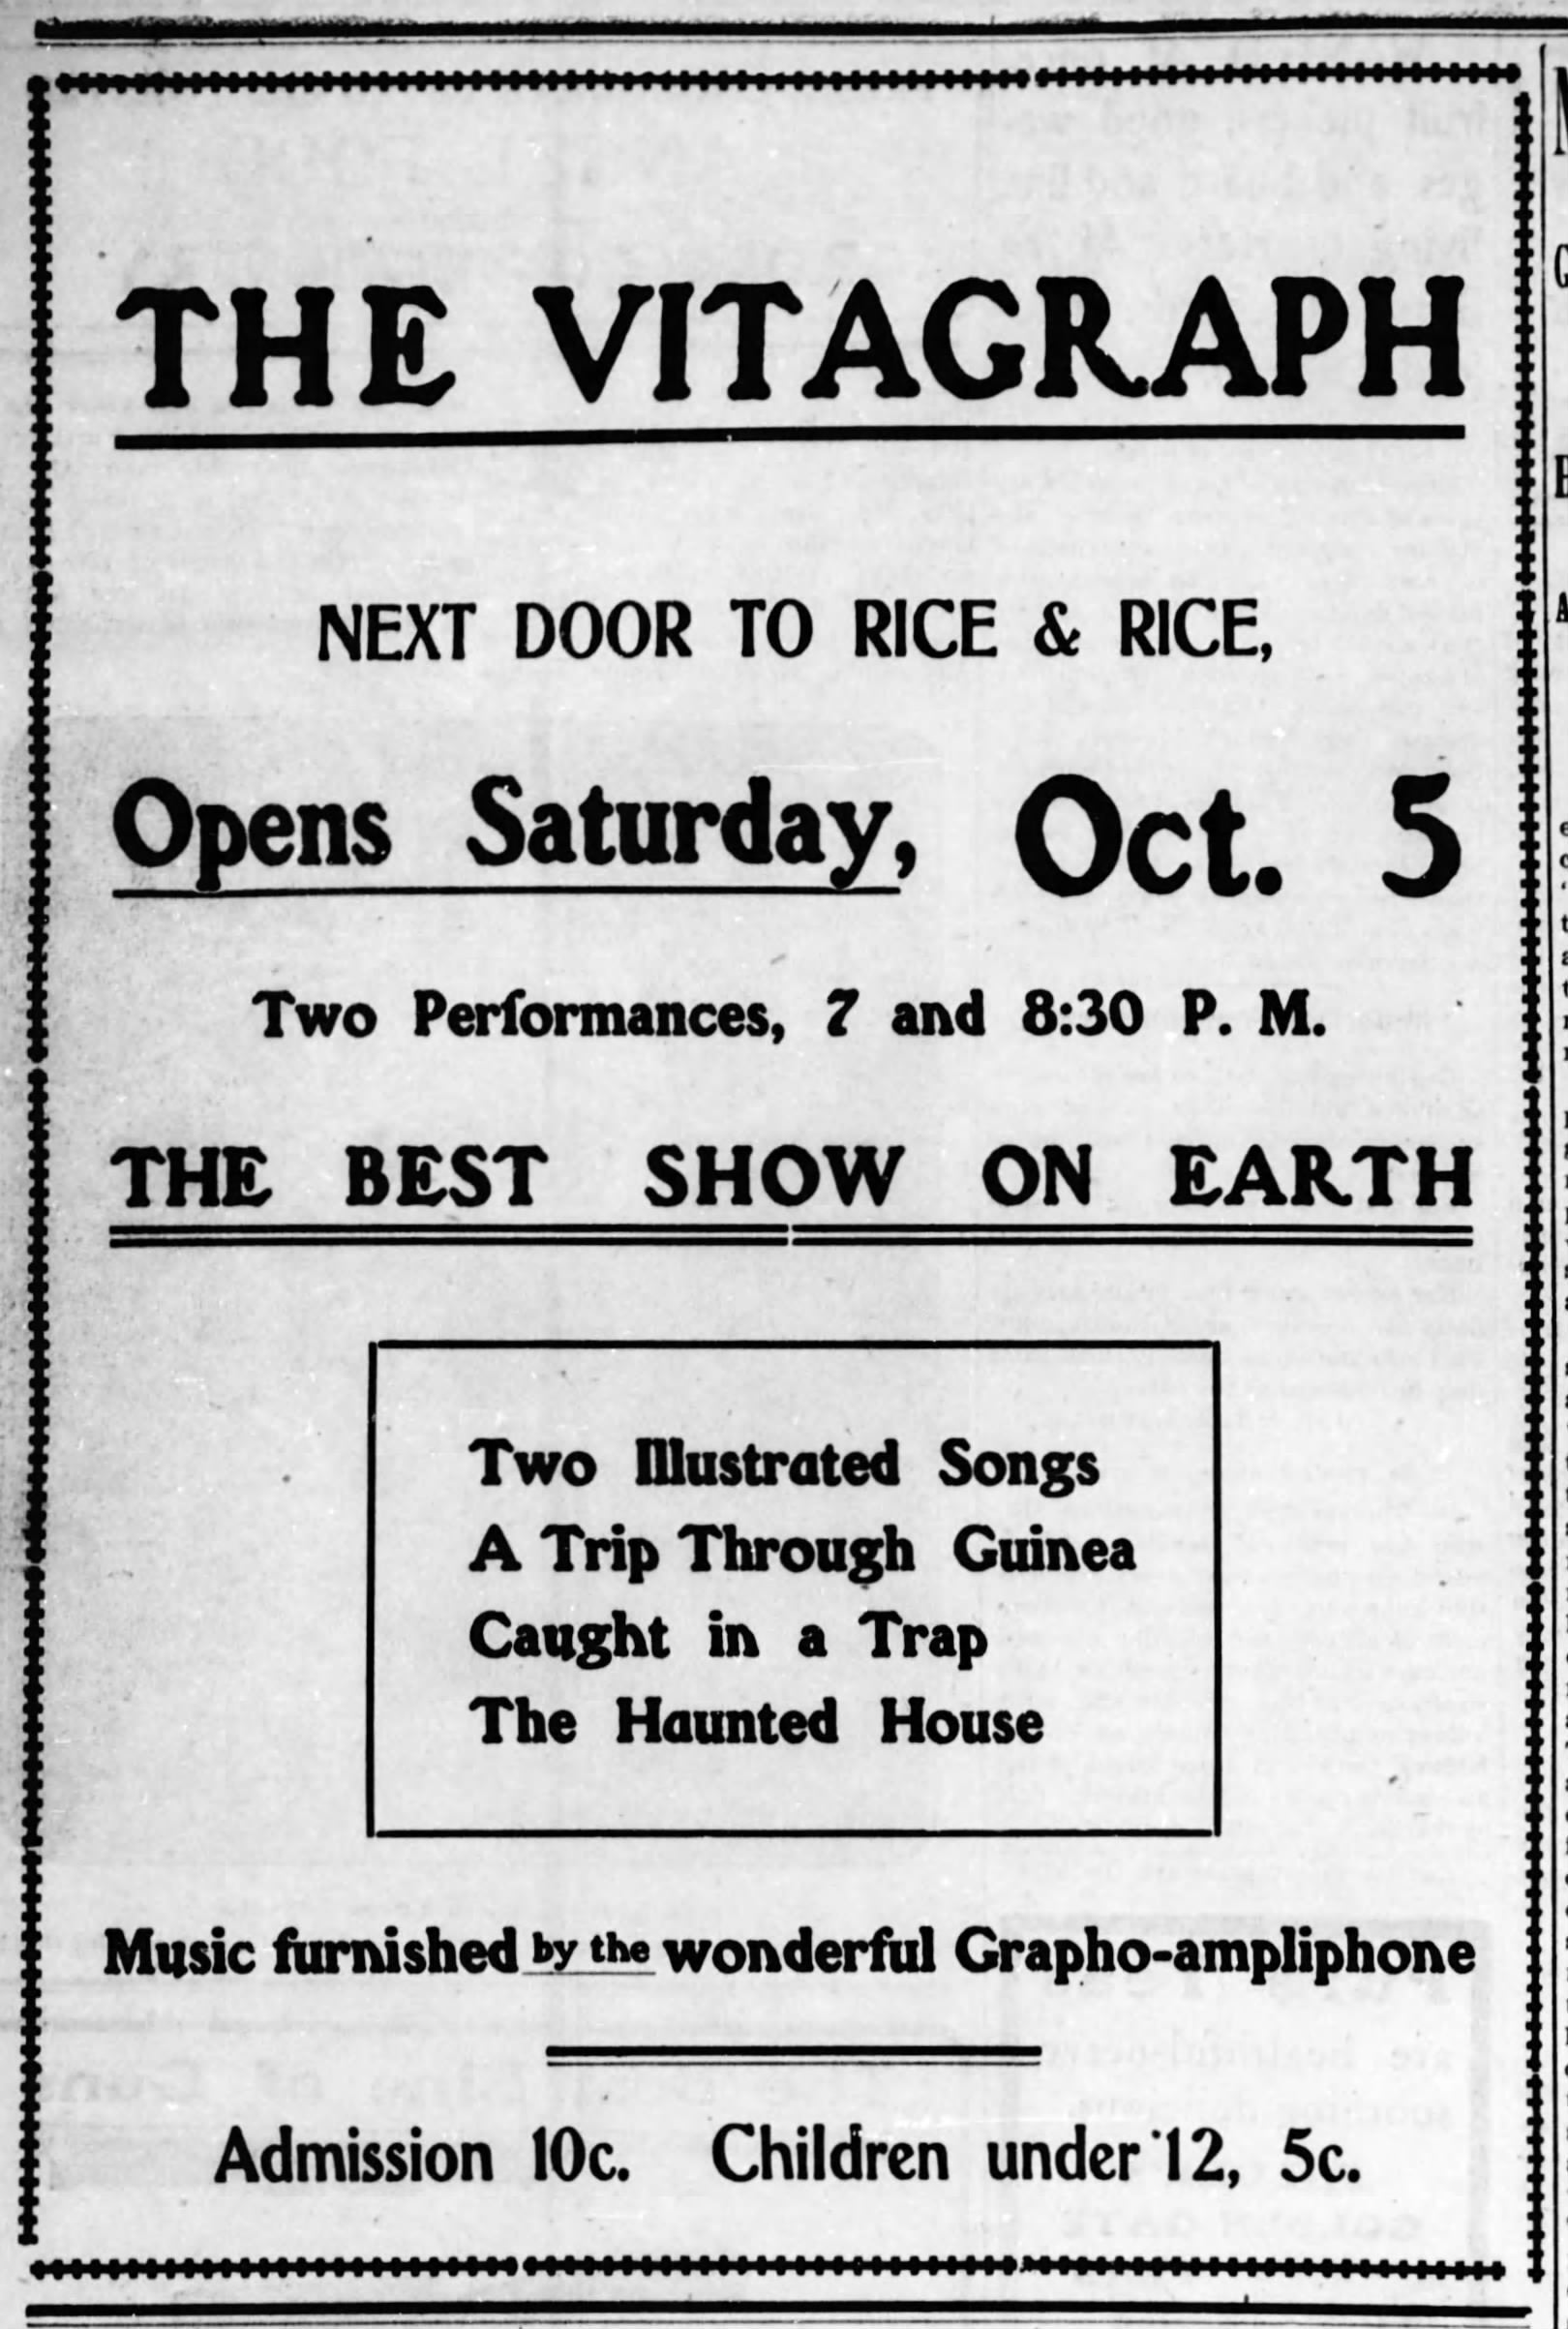 Vitagraph first ad in October 1907